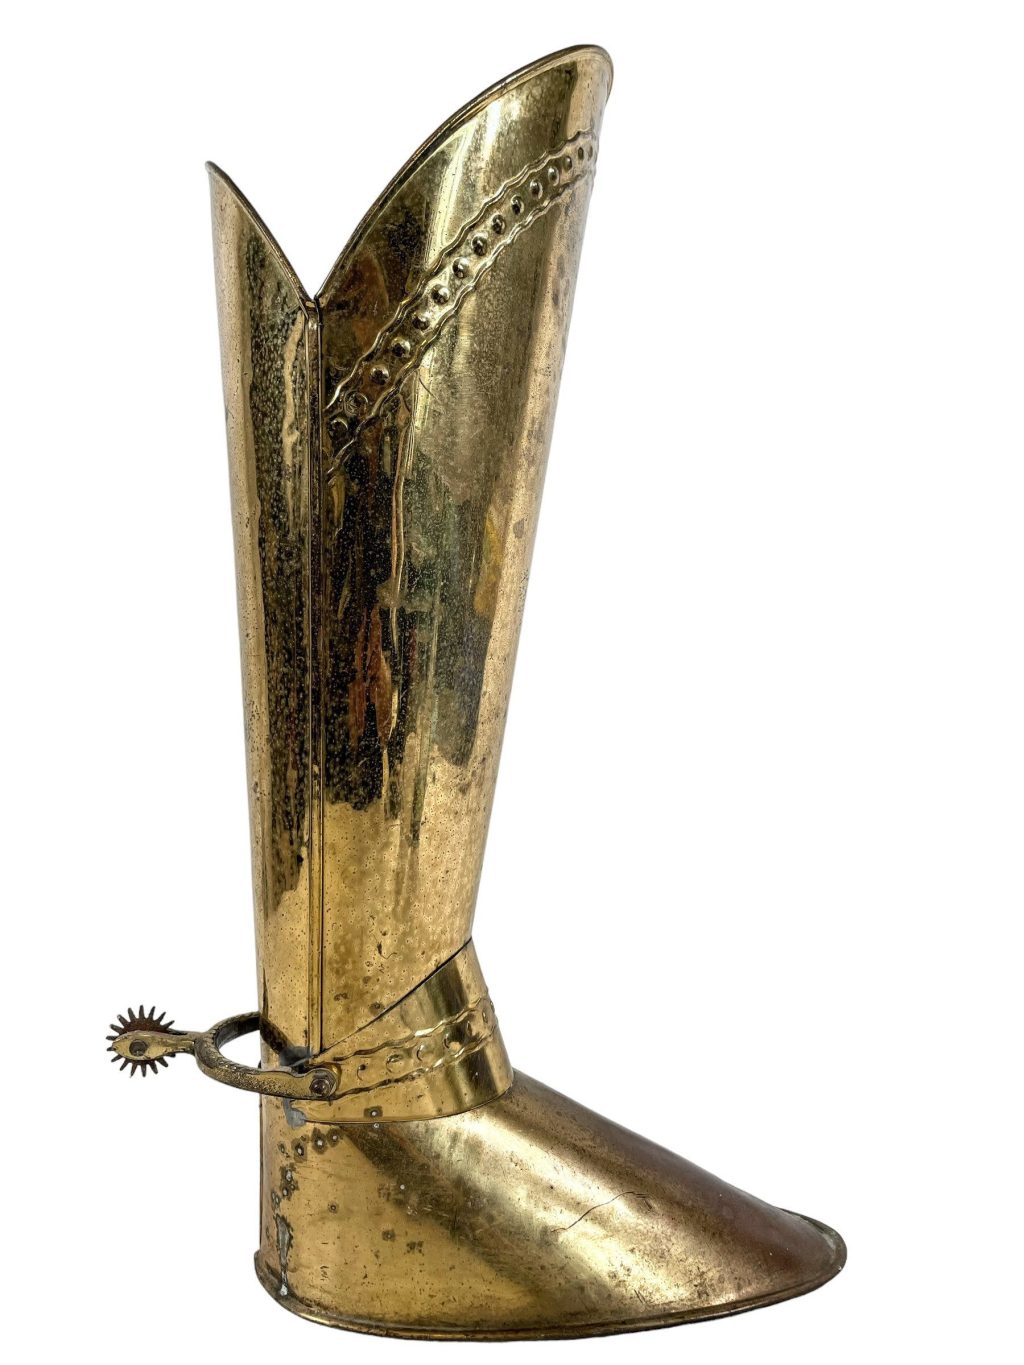 Vintage French Brass Armour Boot With Spur Metal Umbrella Walking Stick Stand Storage Pot Container Hallway Entryway c1960-70’s